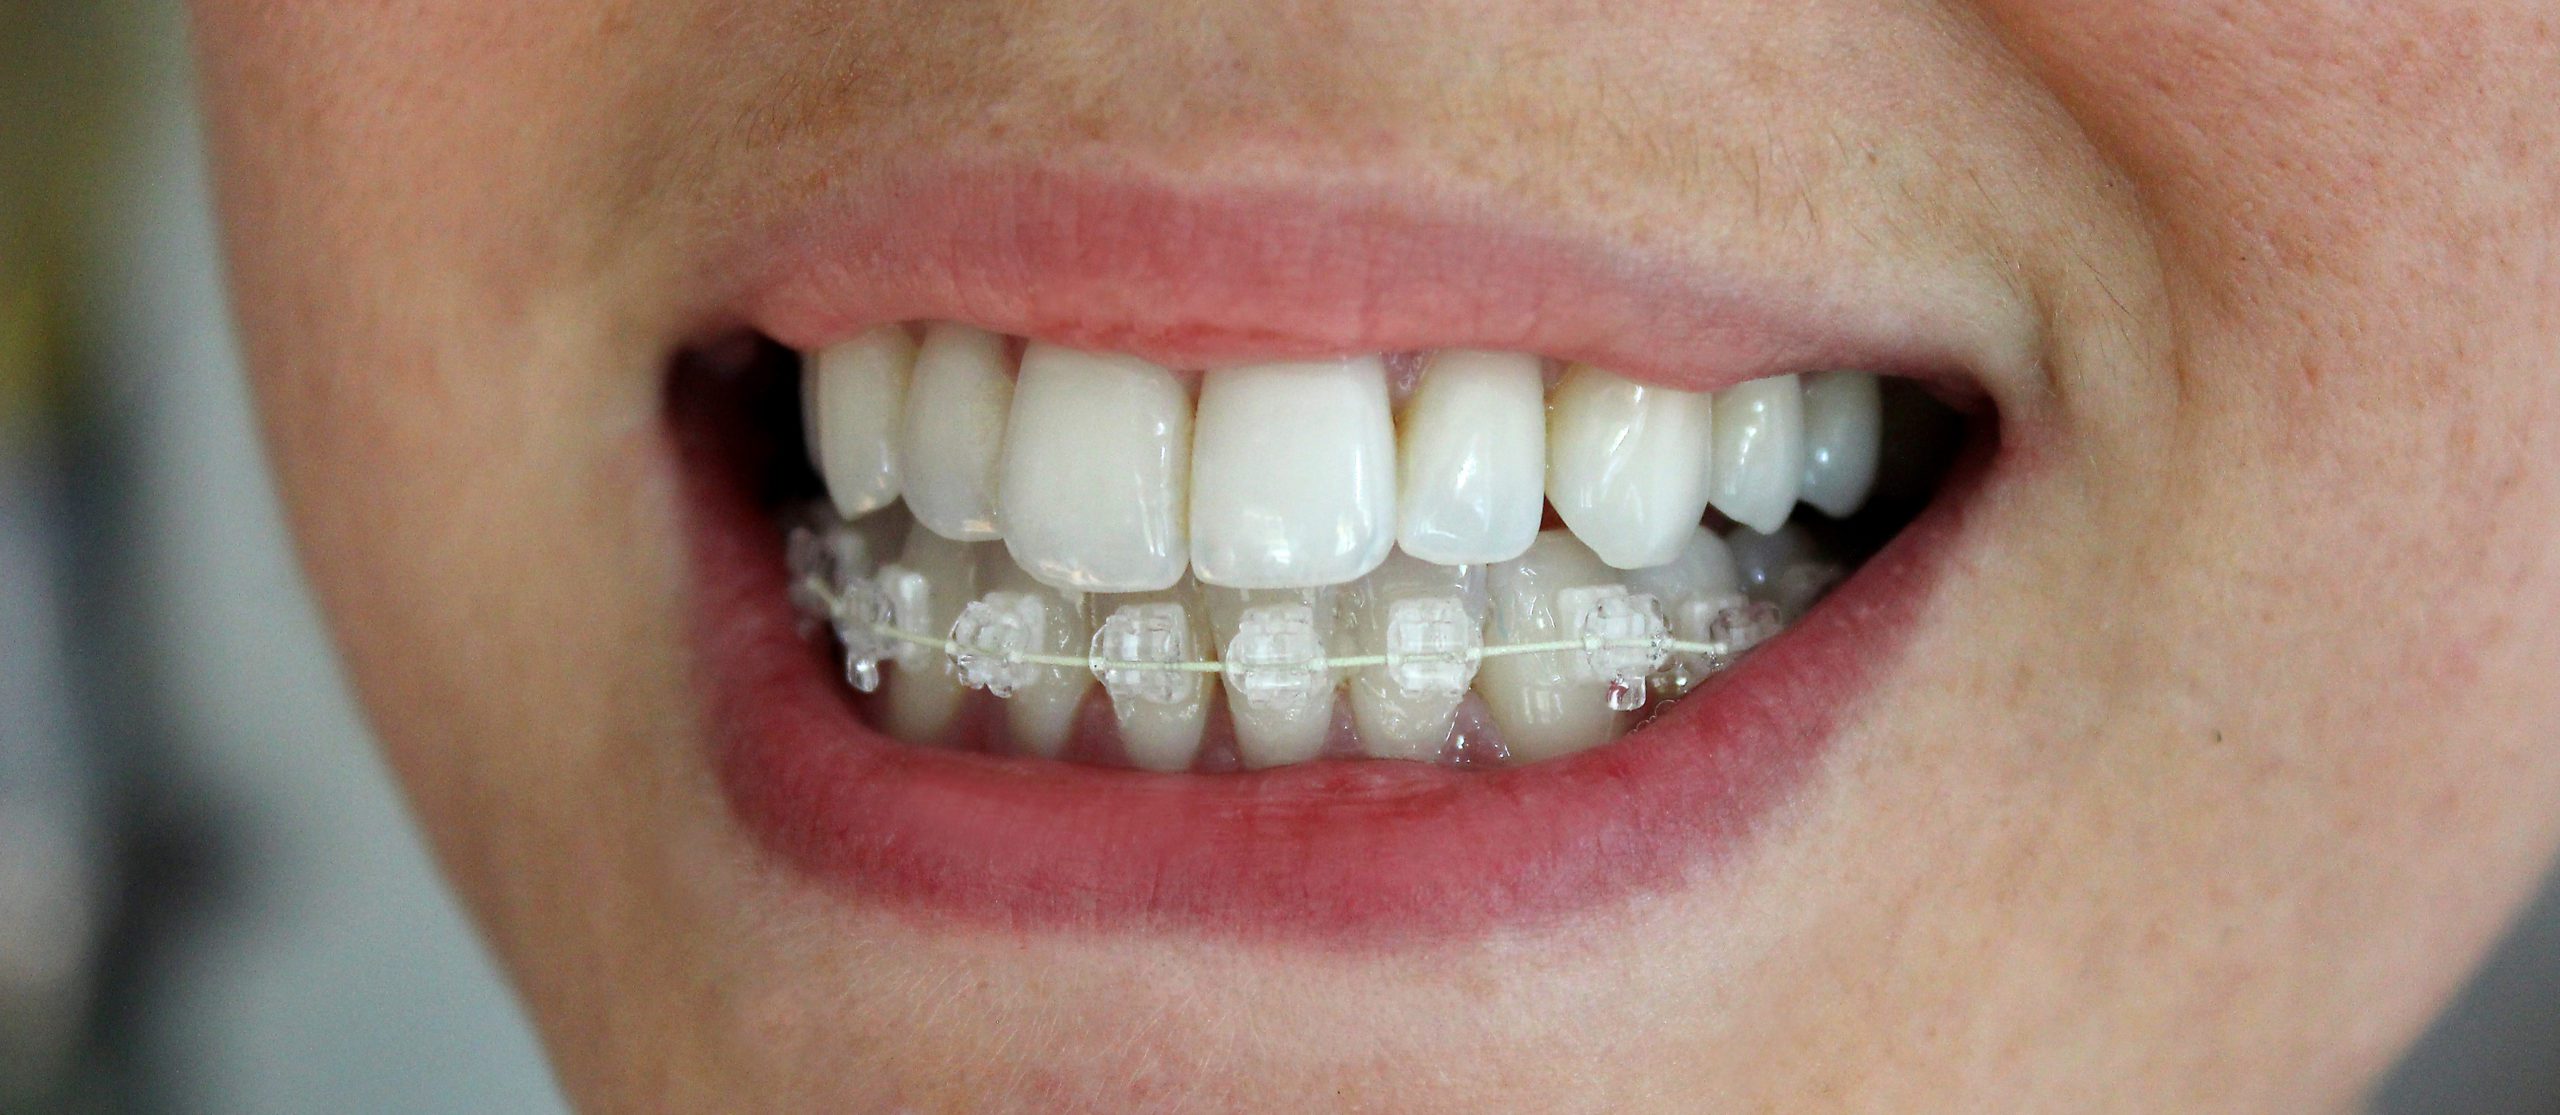 Braces: Types, Procedure, What to Expect